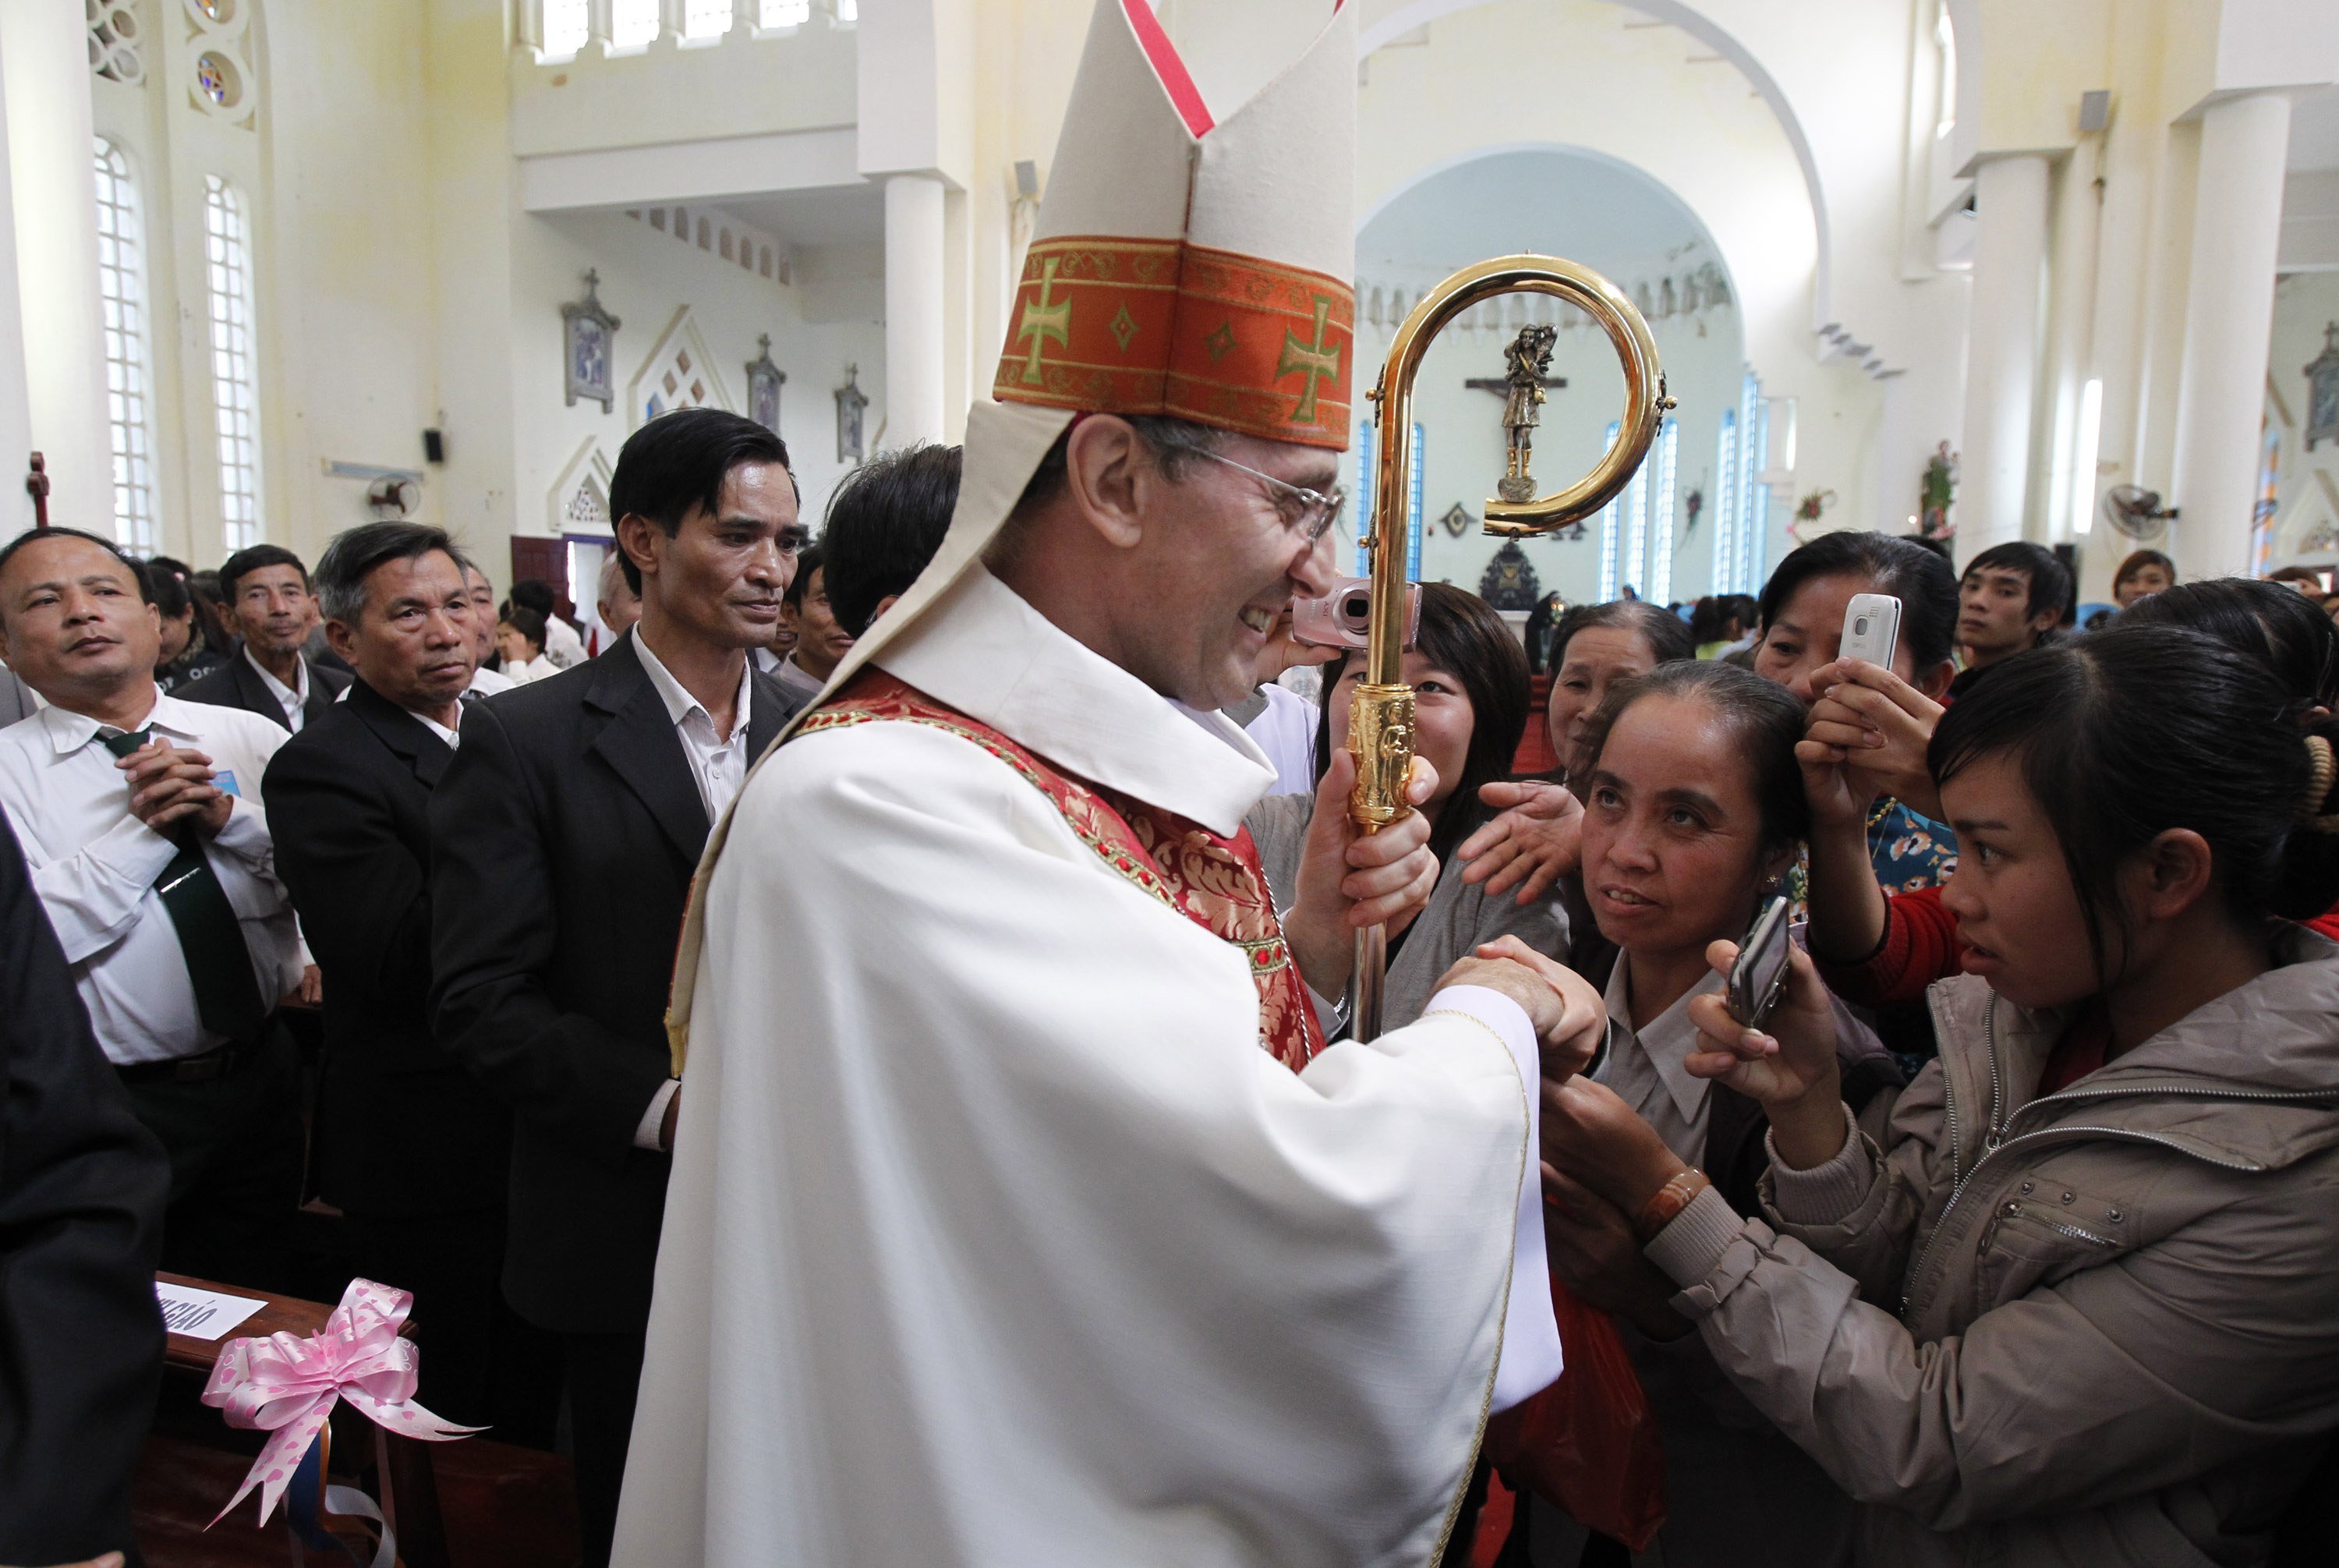 Archbishop Leopoldo Girelli, then nonresident pontifical representative for Vietnam, is greeted by people after Mass at St. Teresa Cathedral in Son Tay, Vietnam, in this Nov. 25, 2011. (CNS photo/Kham, Reuters)